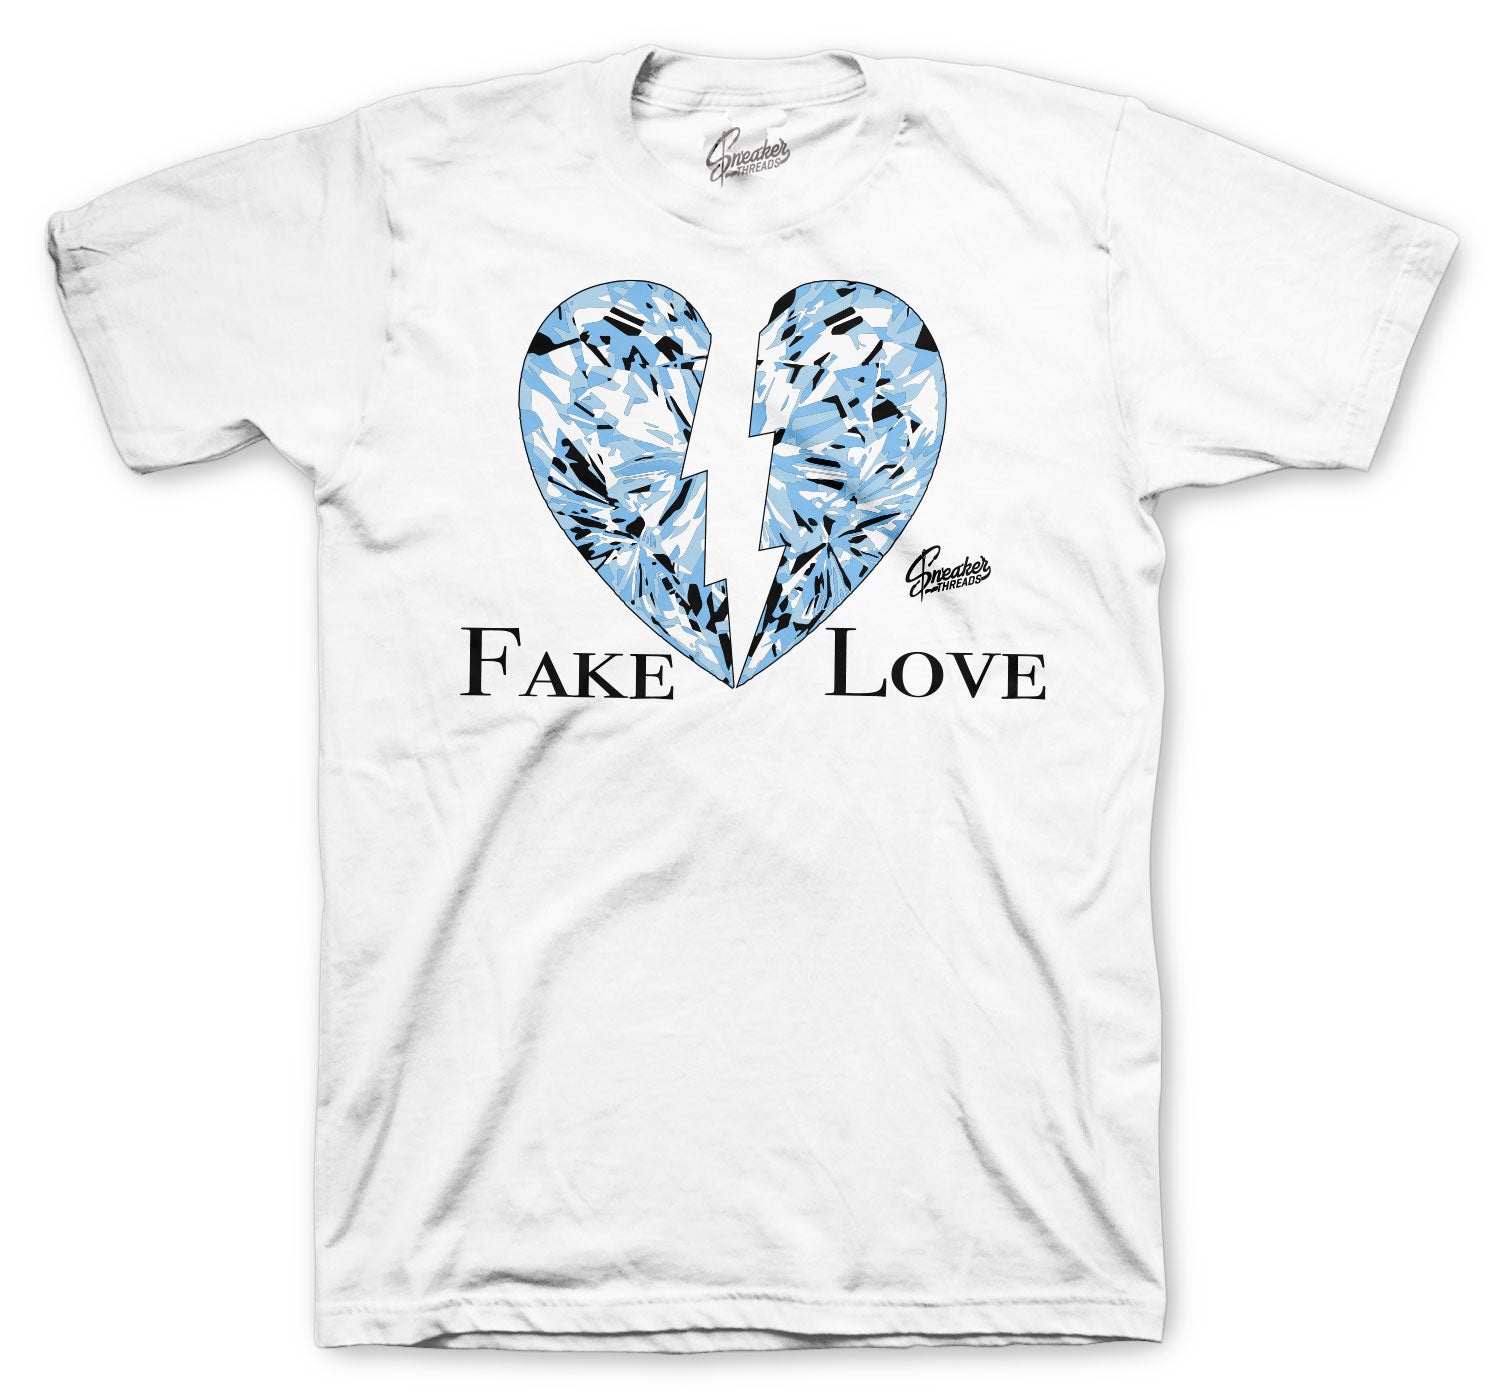 Legend Blue Jordan 11 Sneaker Collection T Shirts The Best Tees To Match Retro 11